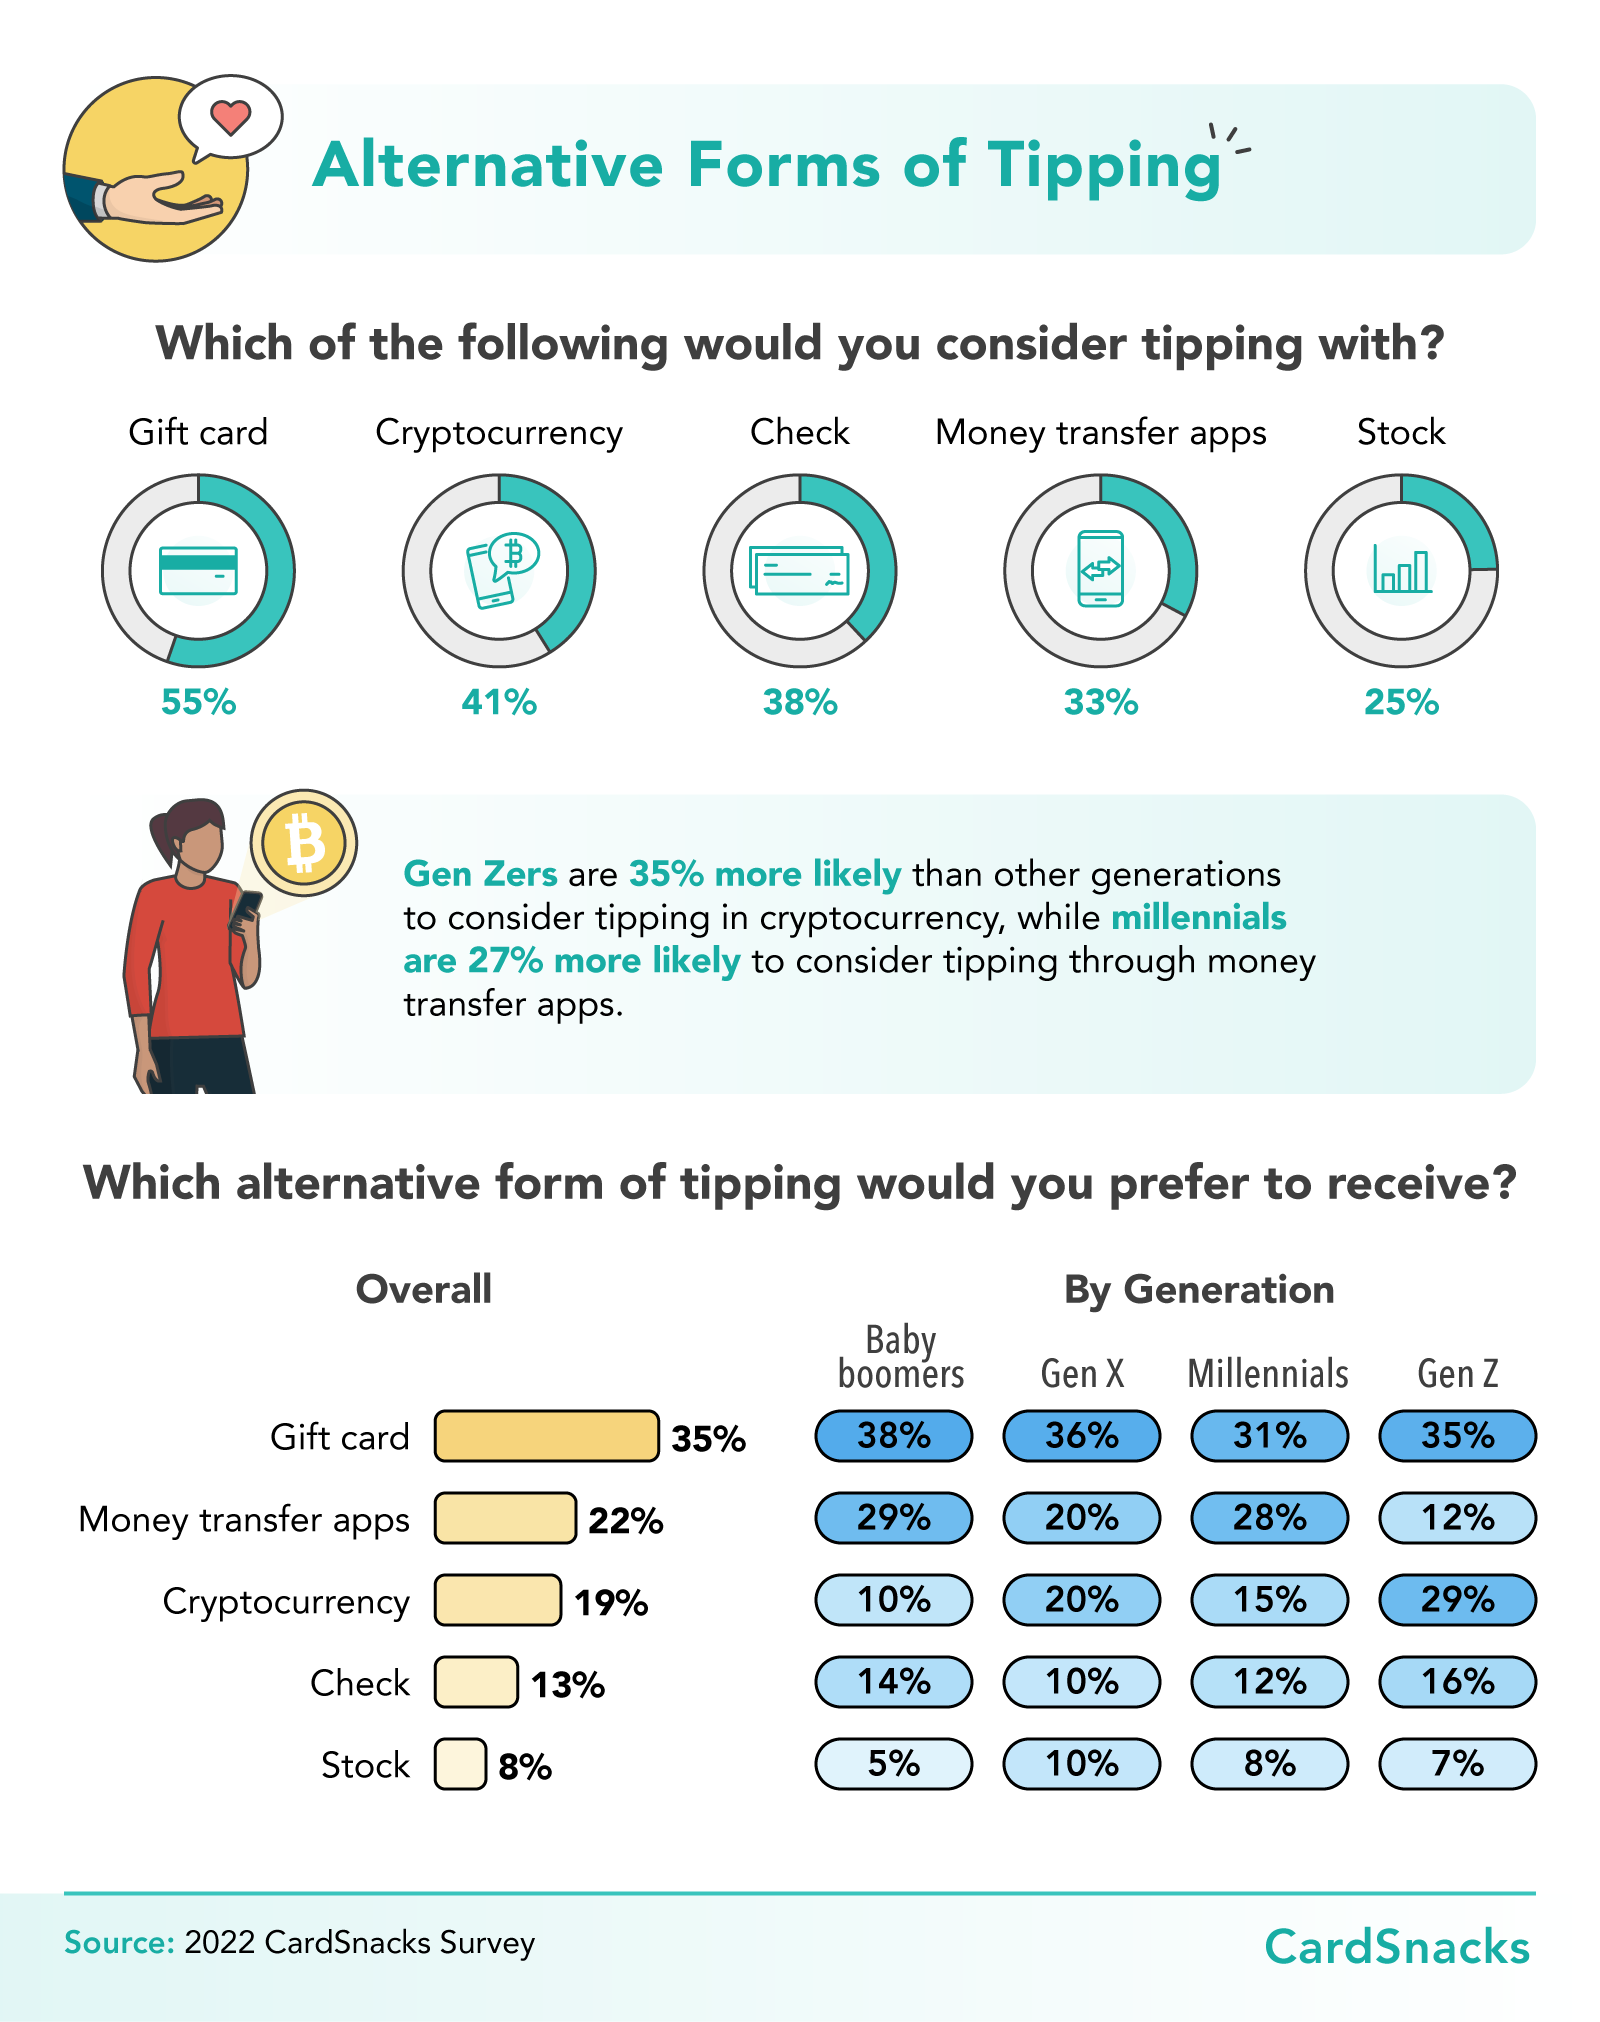 Alternative forms of tipping